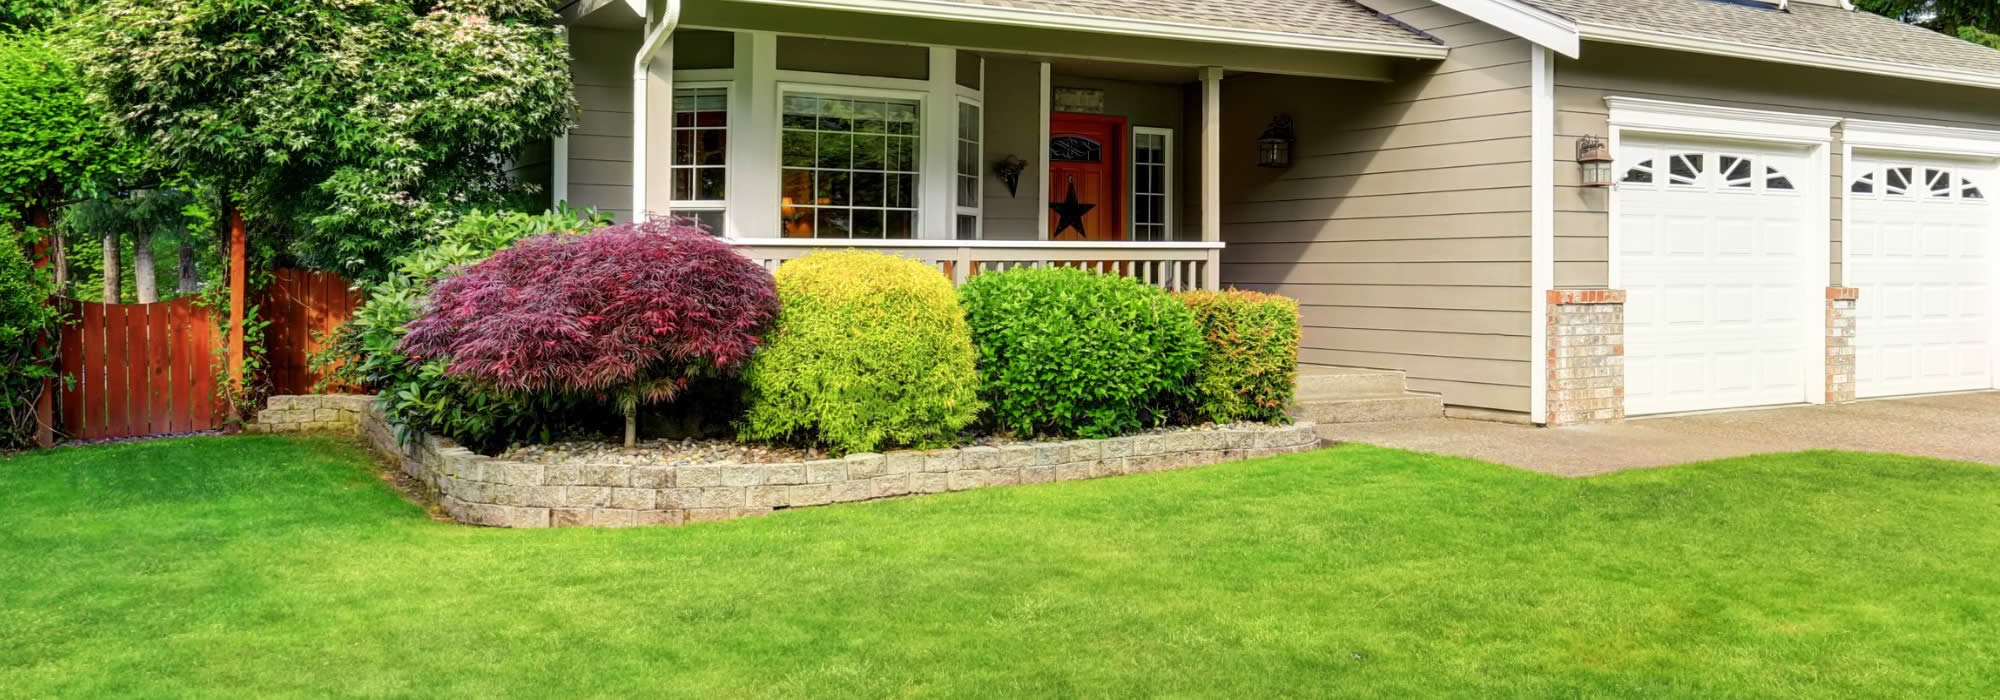 Landscaping Services in Monona